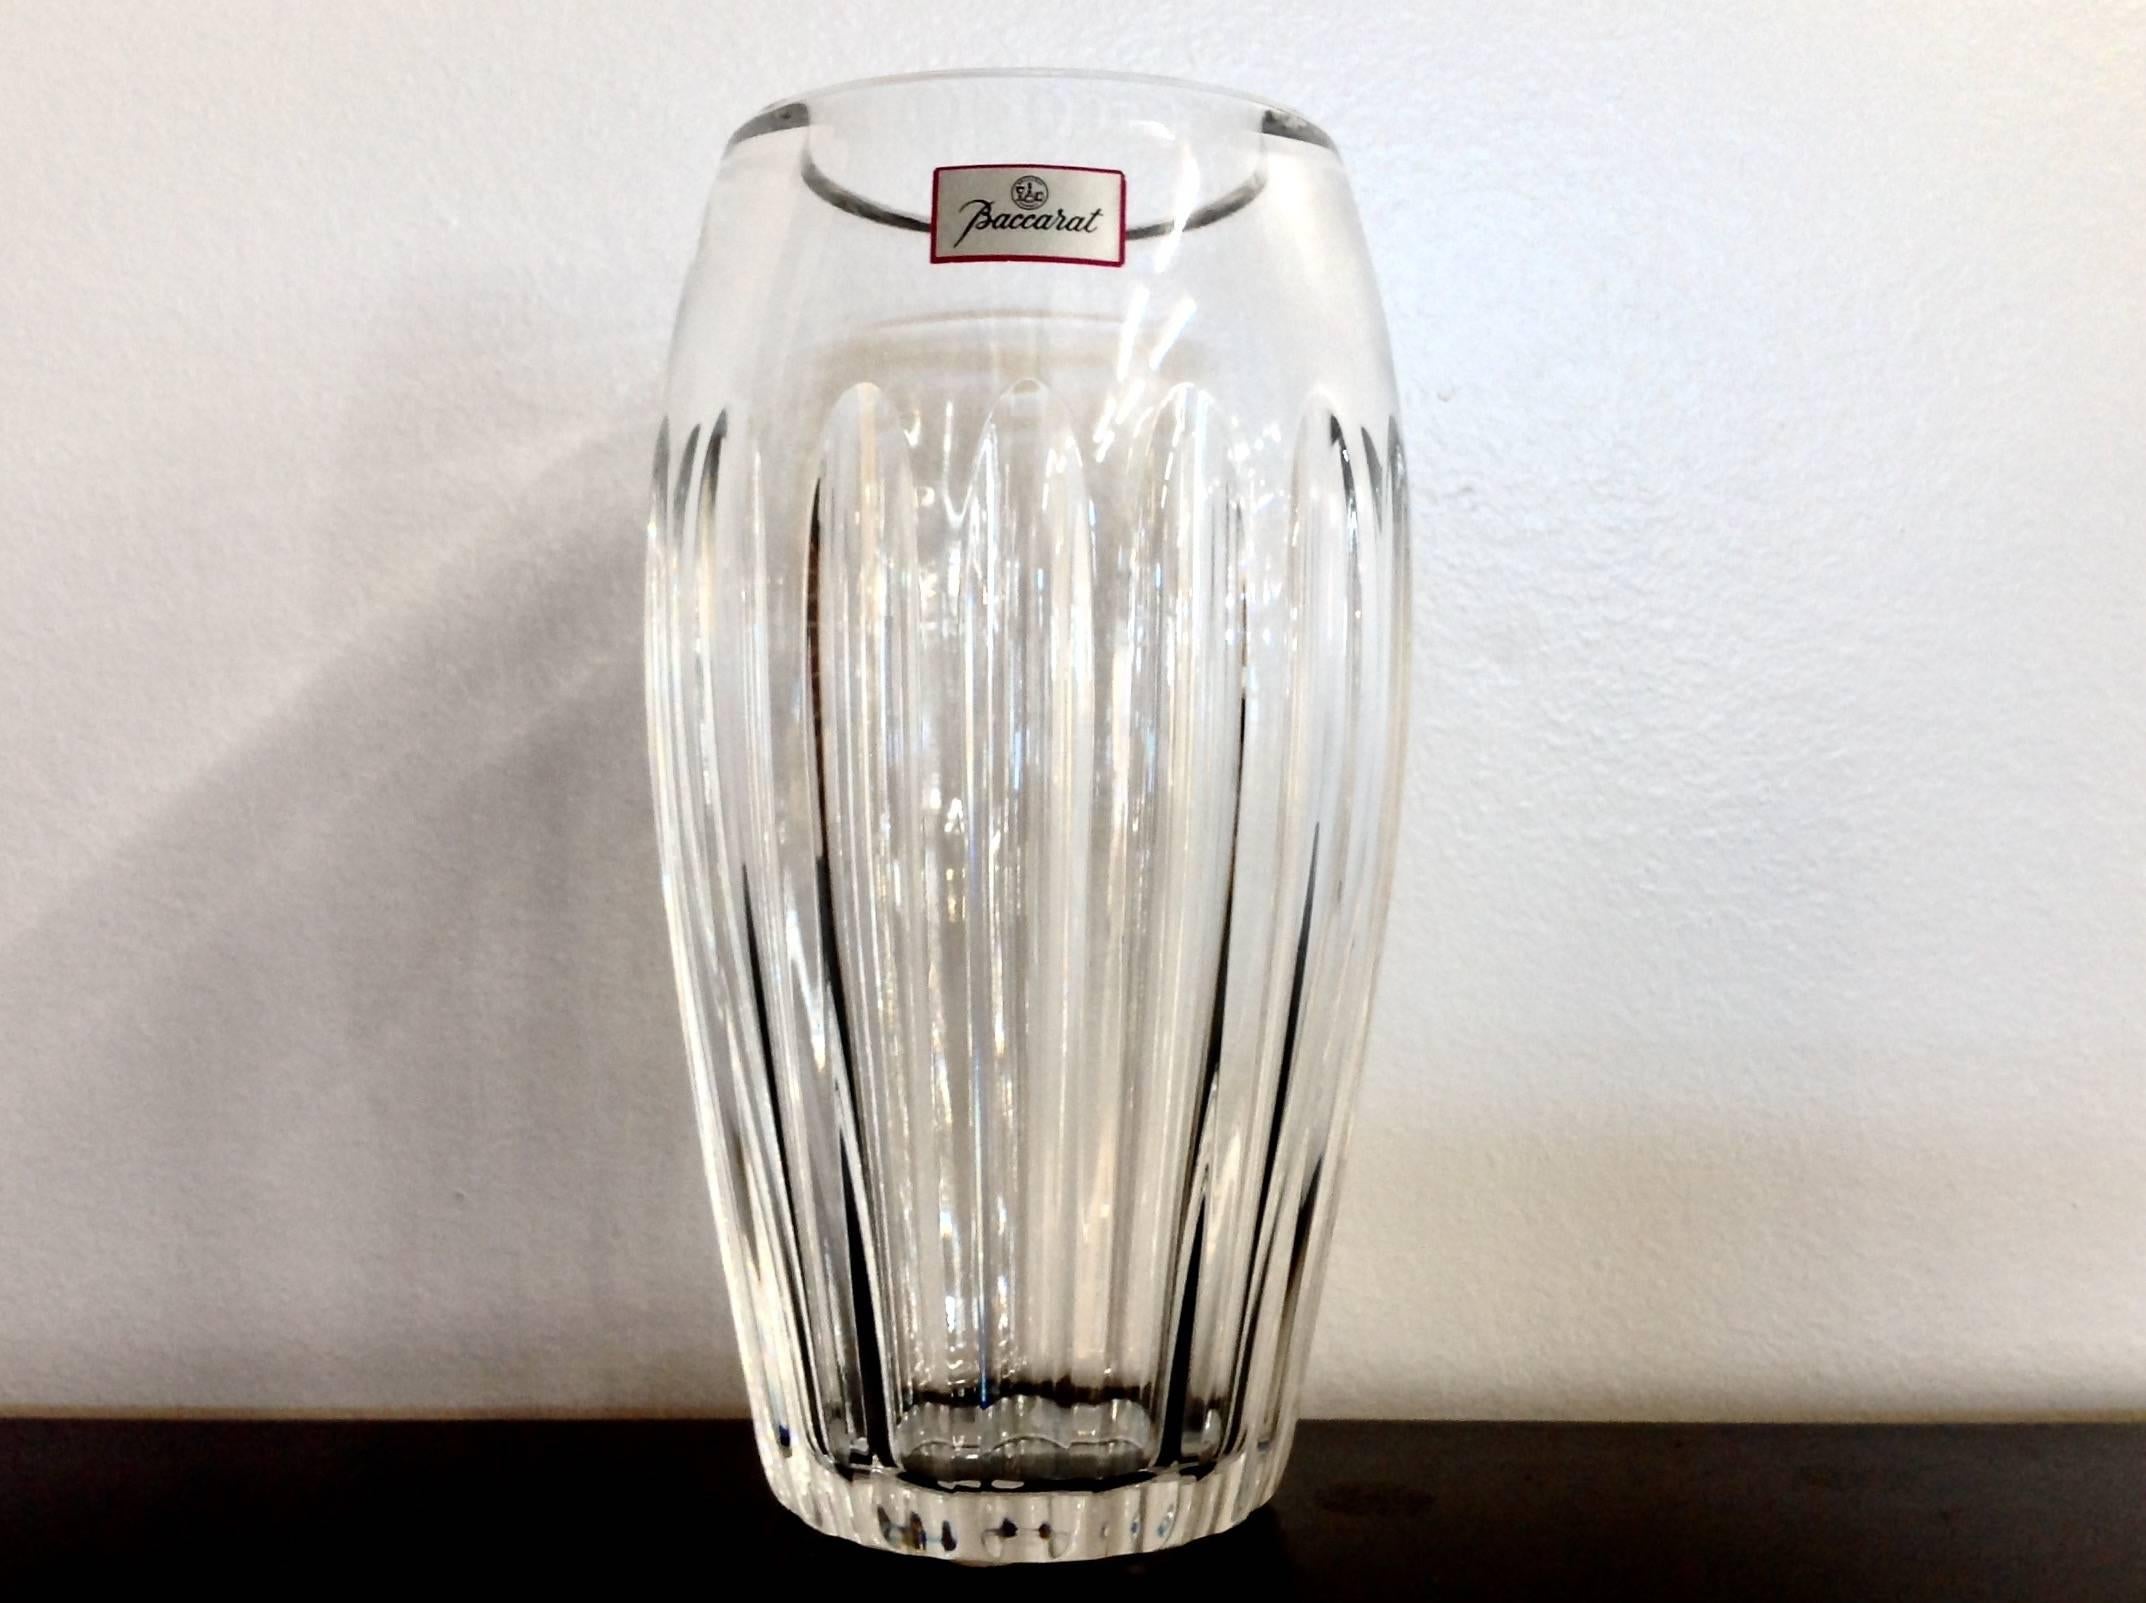 Beautiful flower vase in the Acropole pattern by Baccarat crystal. In excellent condition, comes with original red Baccarat box. Acid-etched Baccarat mark on bottom. Measures 8 inches tall and about 5 inches wide.